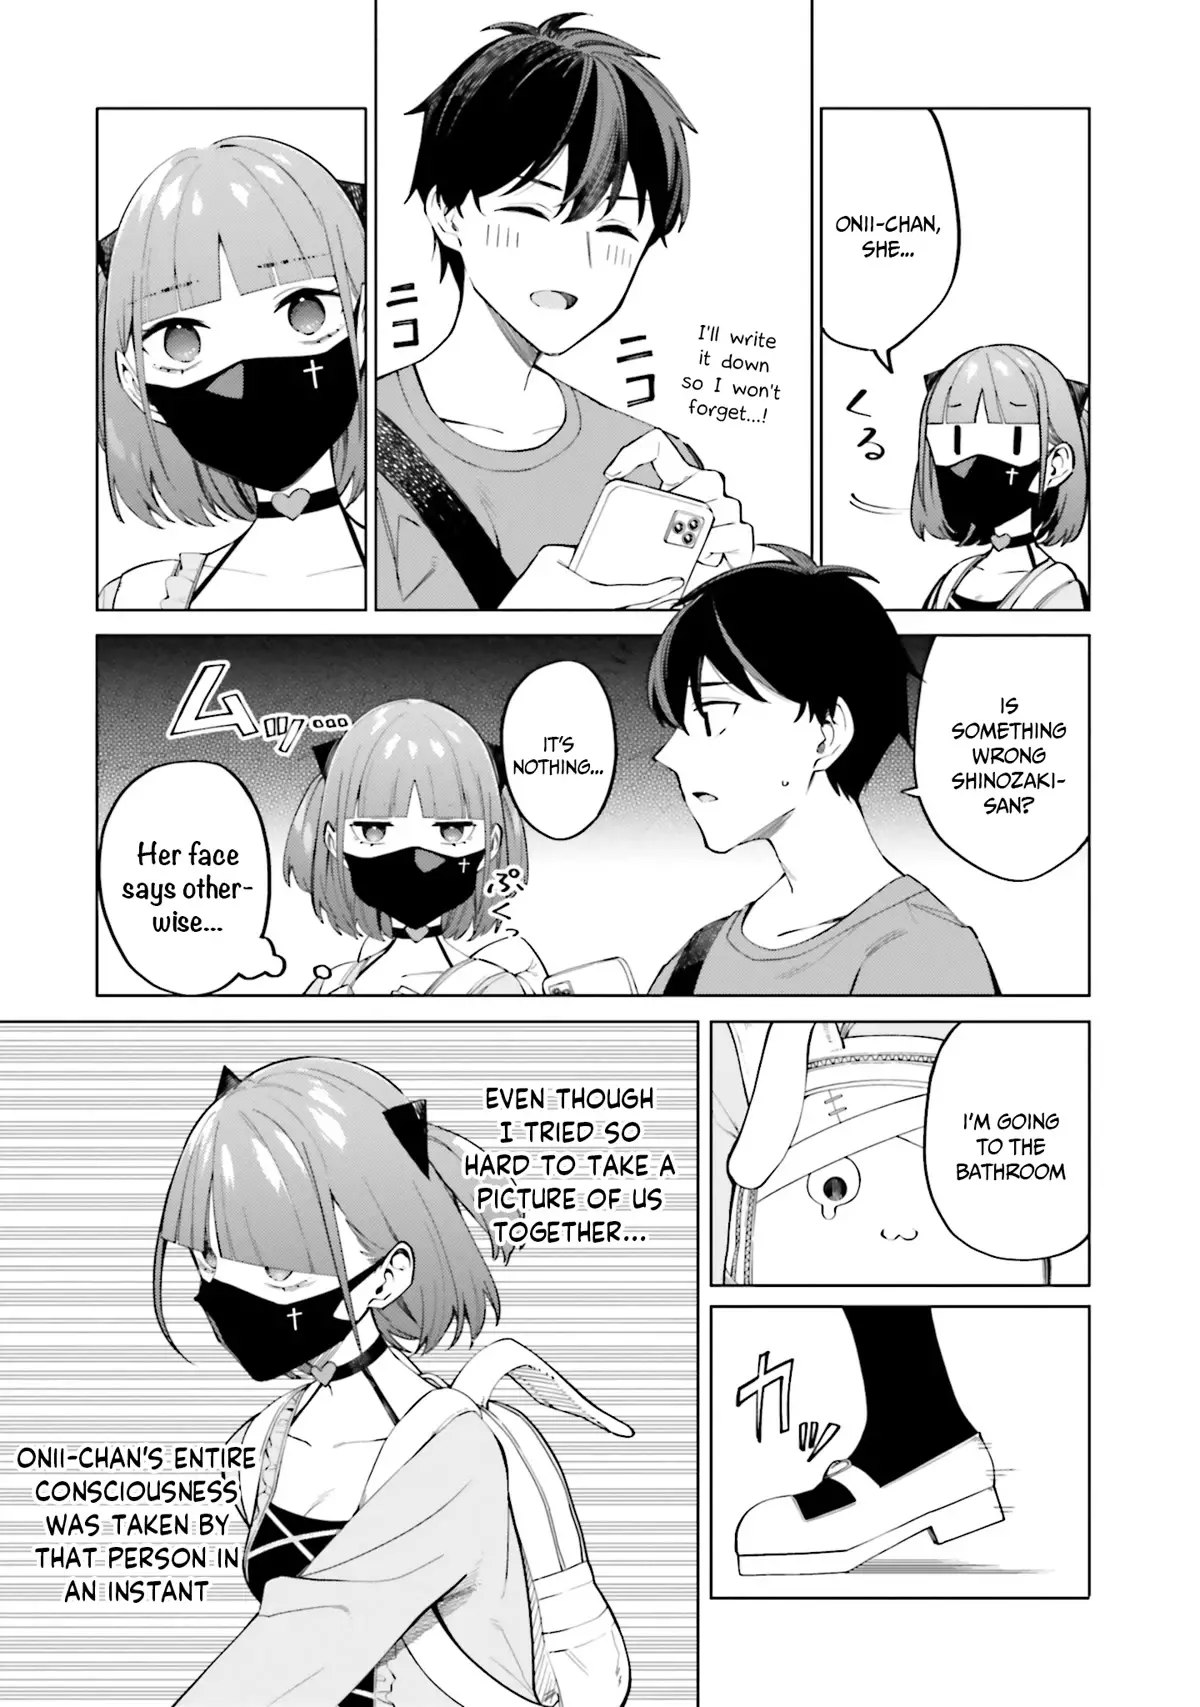 I Don't Understand Shirogane-San's Facial Expression At All - 11 page 12-32b2380c